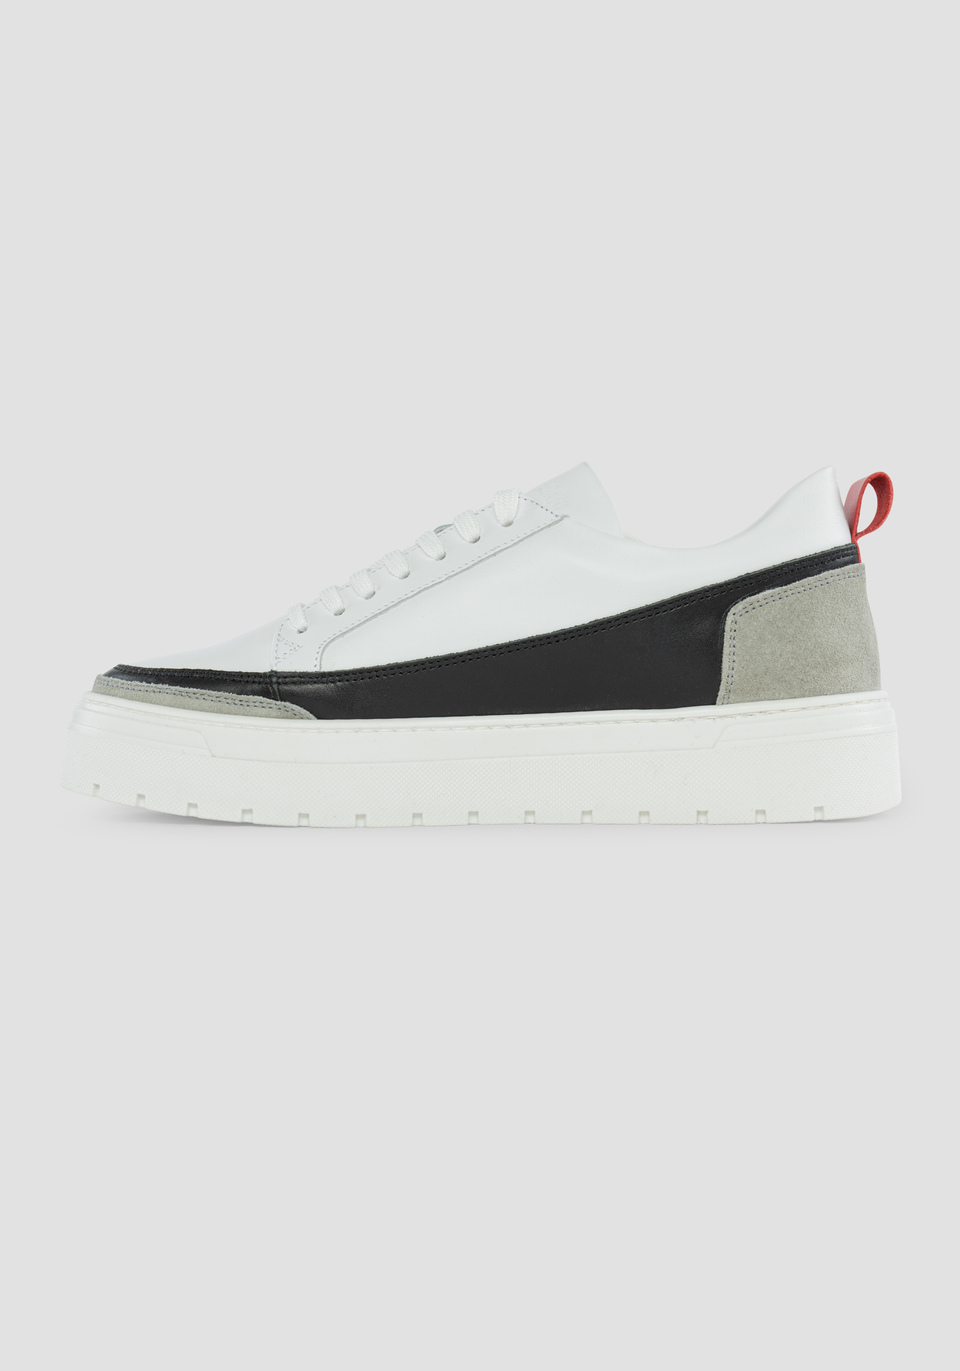 "FLINT" LOW-TOP SNEAKERS IN NAPPA LEATHER WITH SUEDE DETAILS - Antony Morato Online Shop